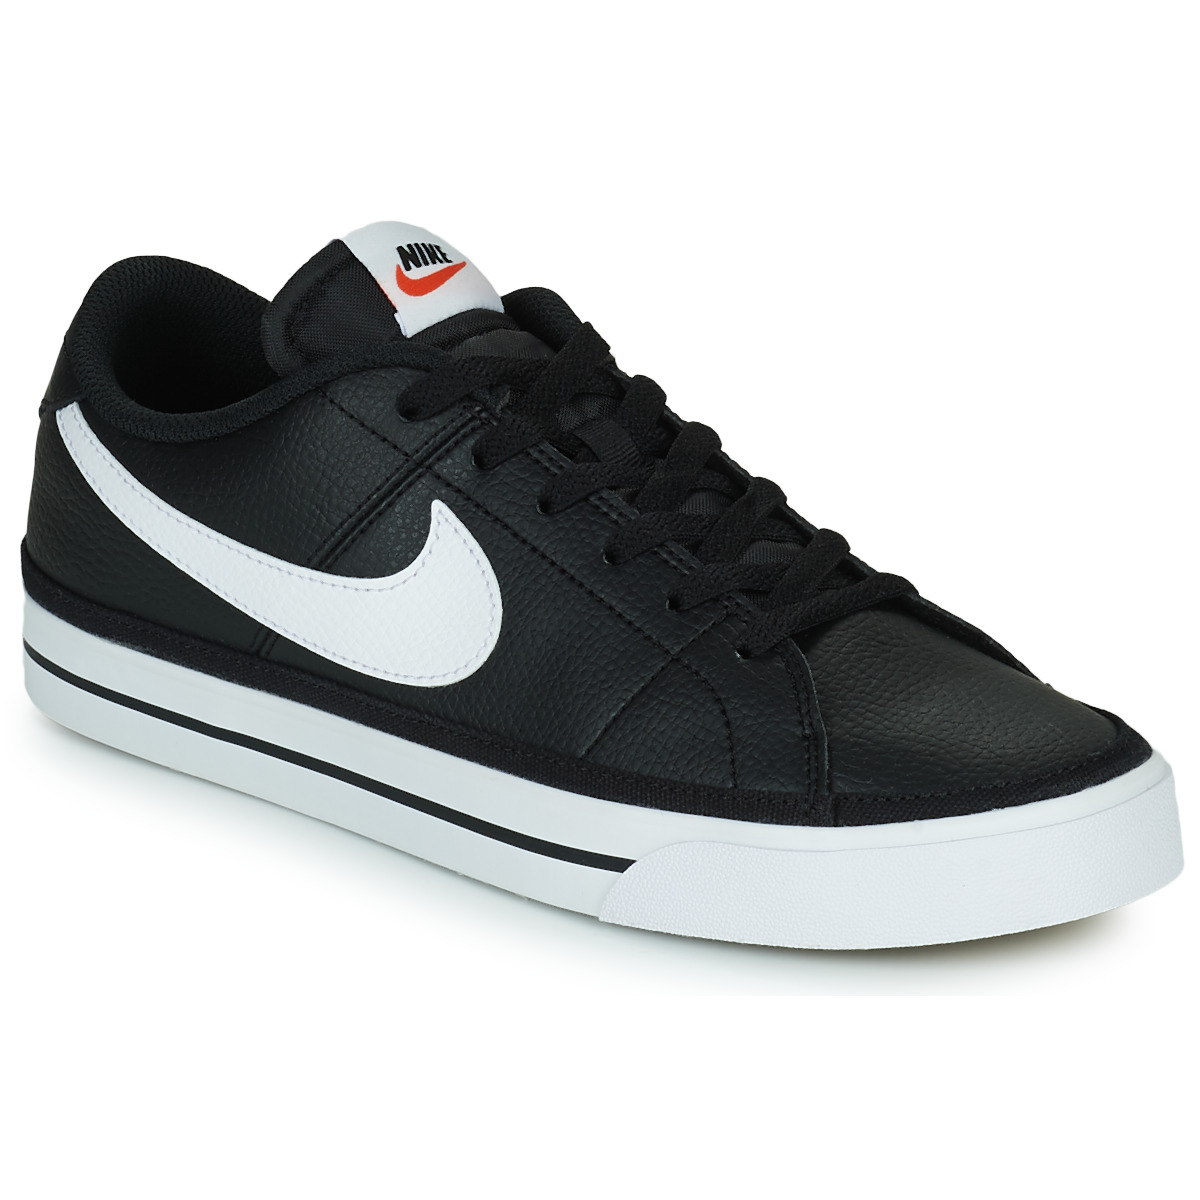 Chaussures Homme nike air odyssey 2014 black gold price guide NIKE COURT LEGACY Noir / Blanc